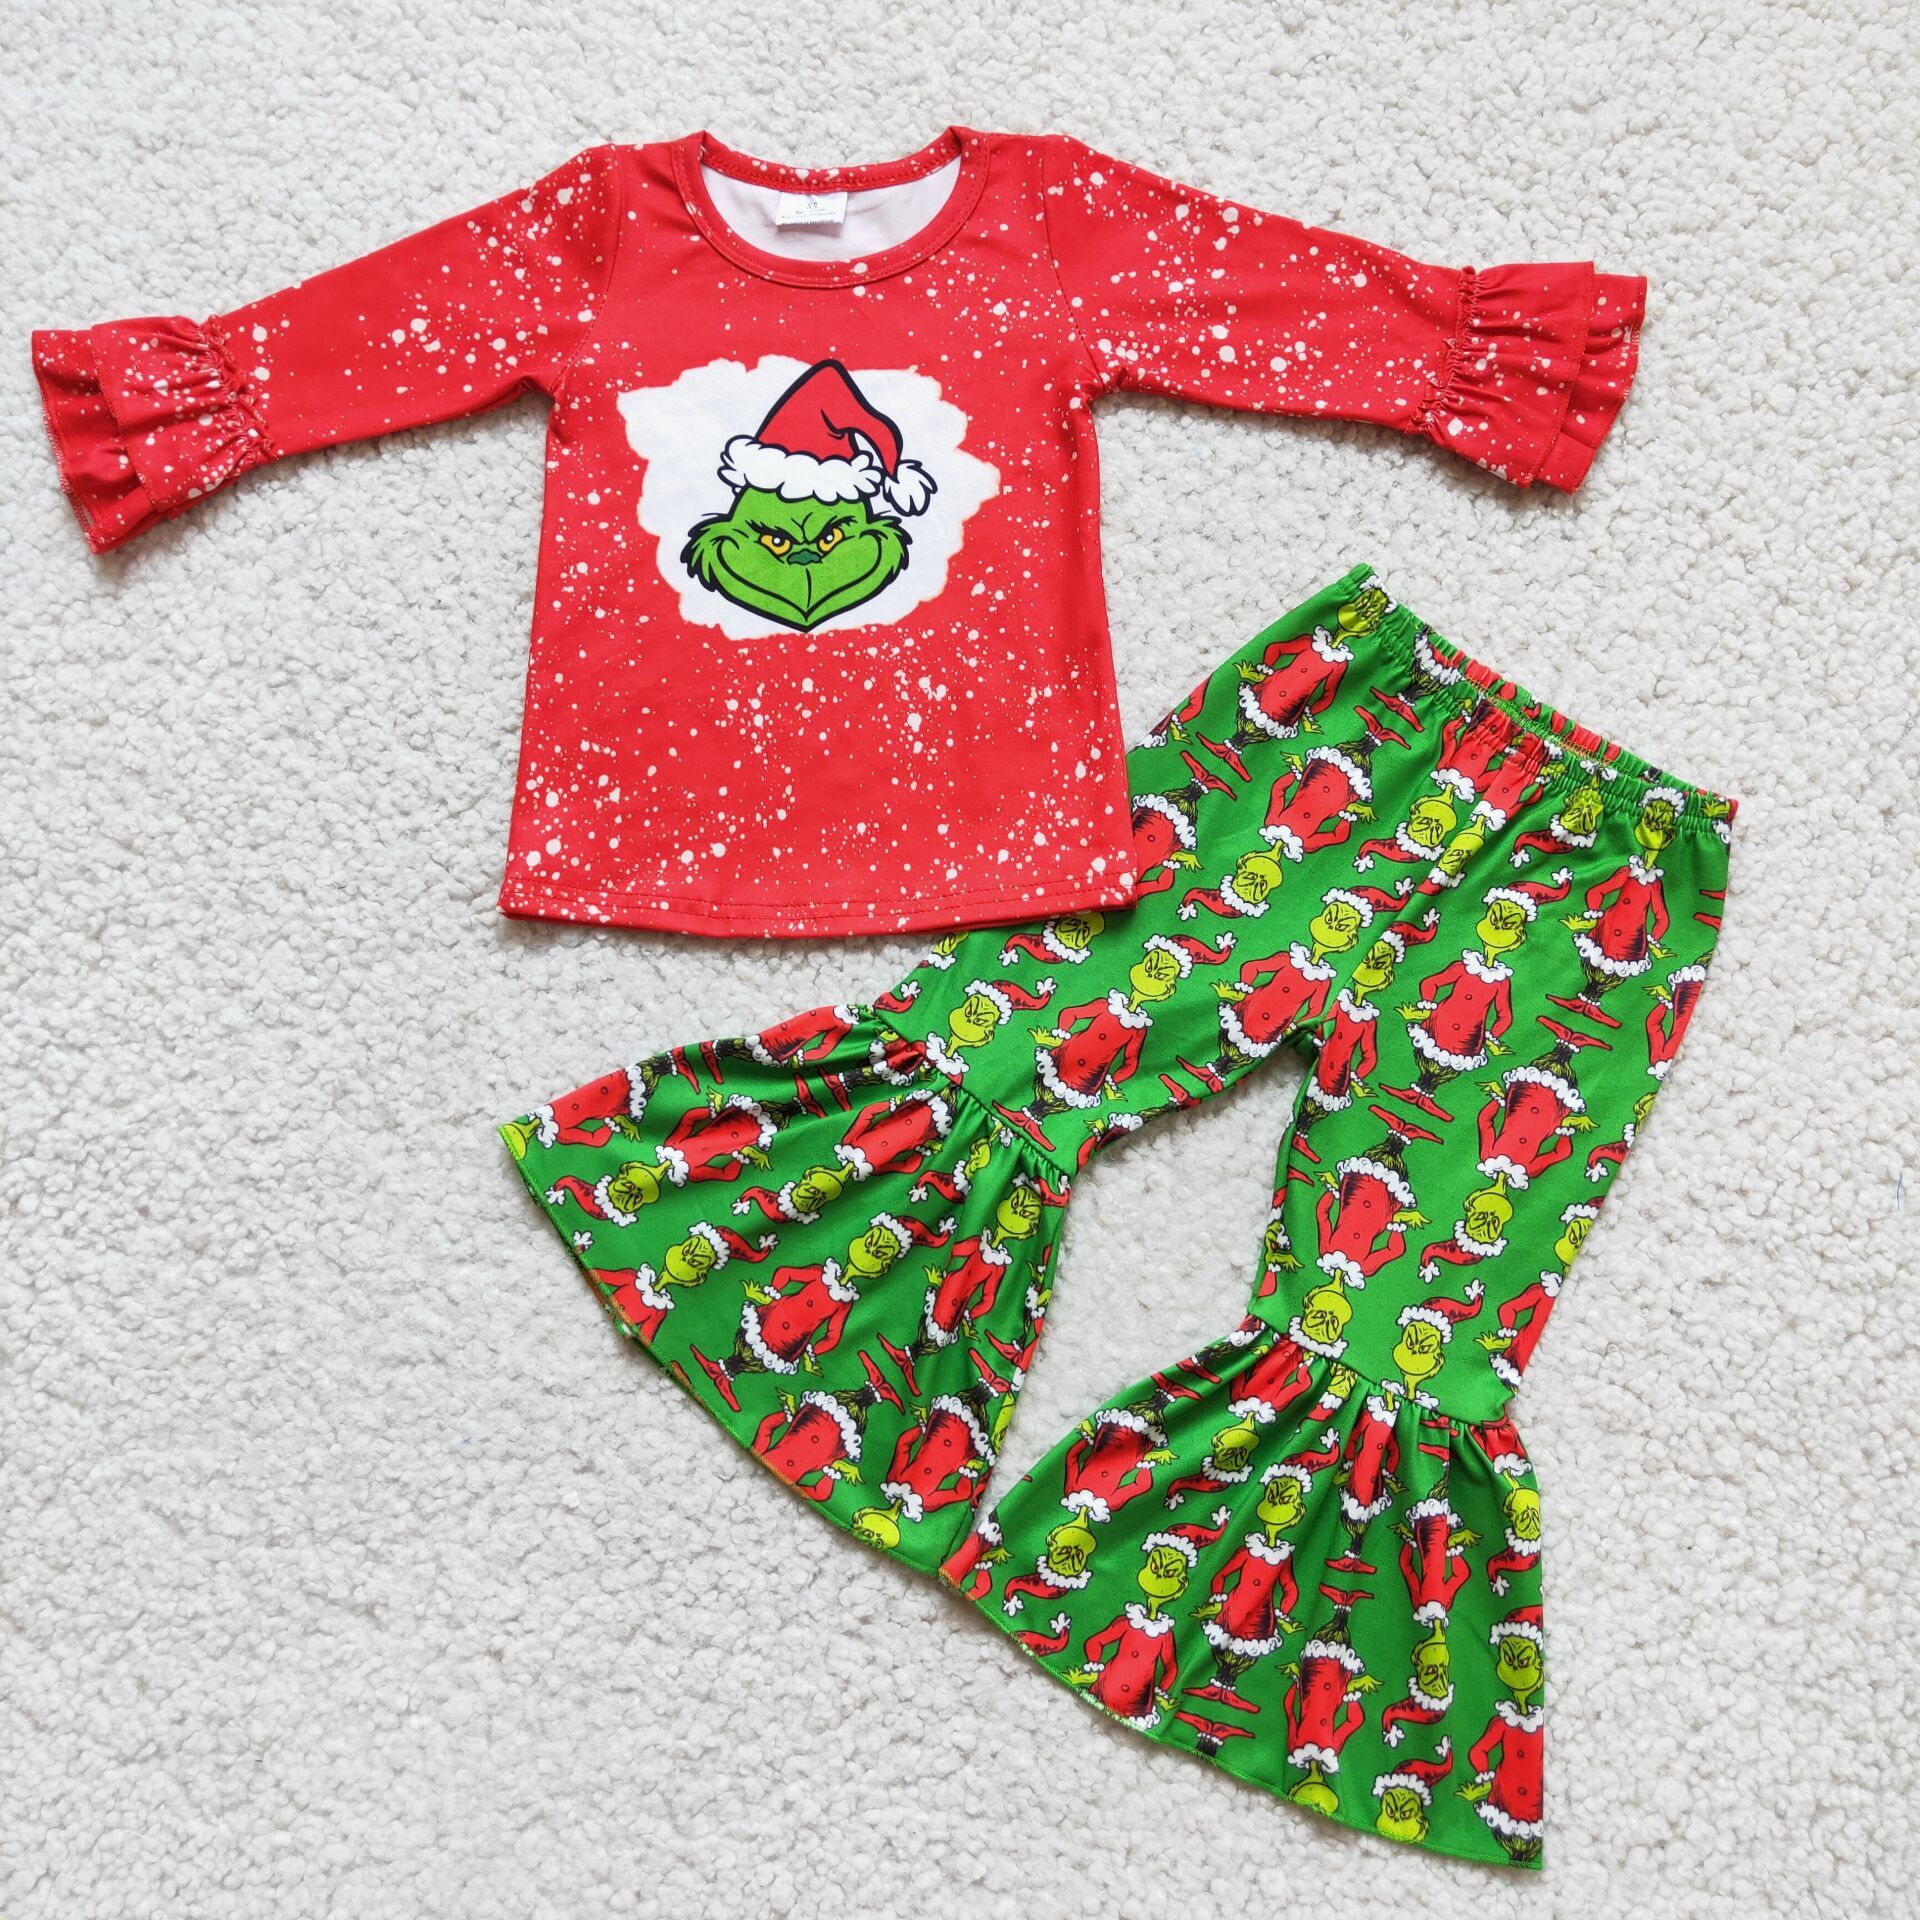 6 B6-37 baby girls clothes cartoon red girls christmas outfit